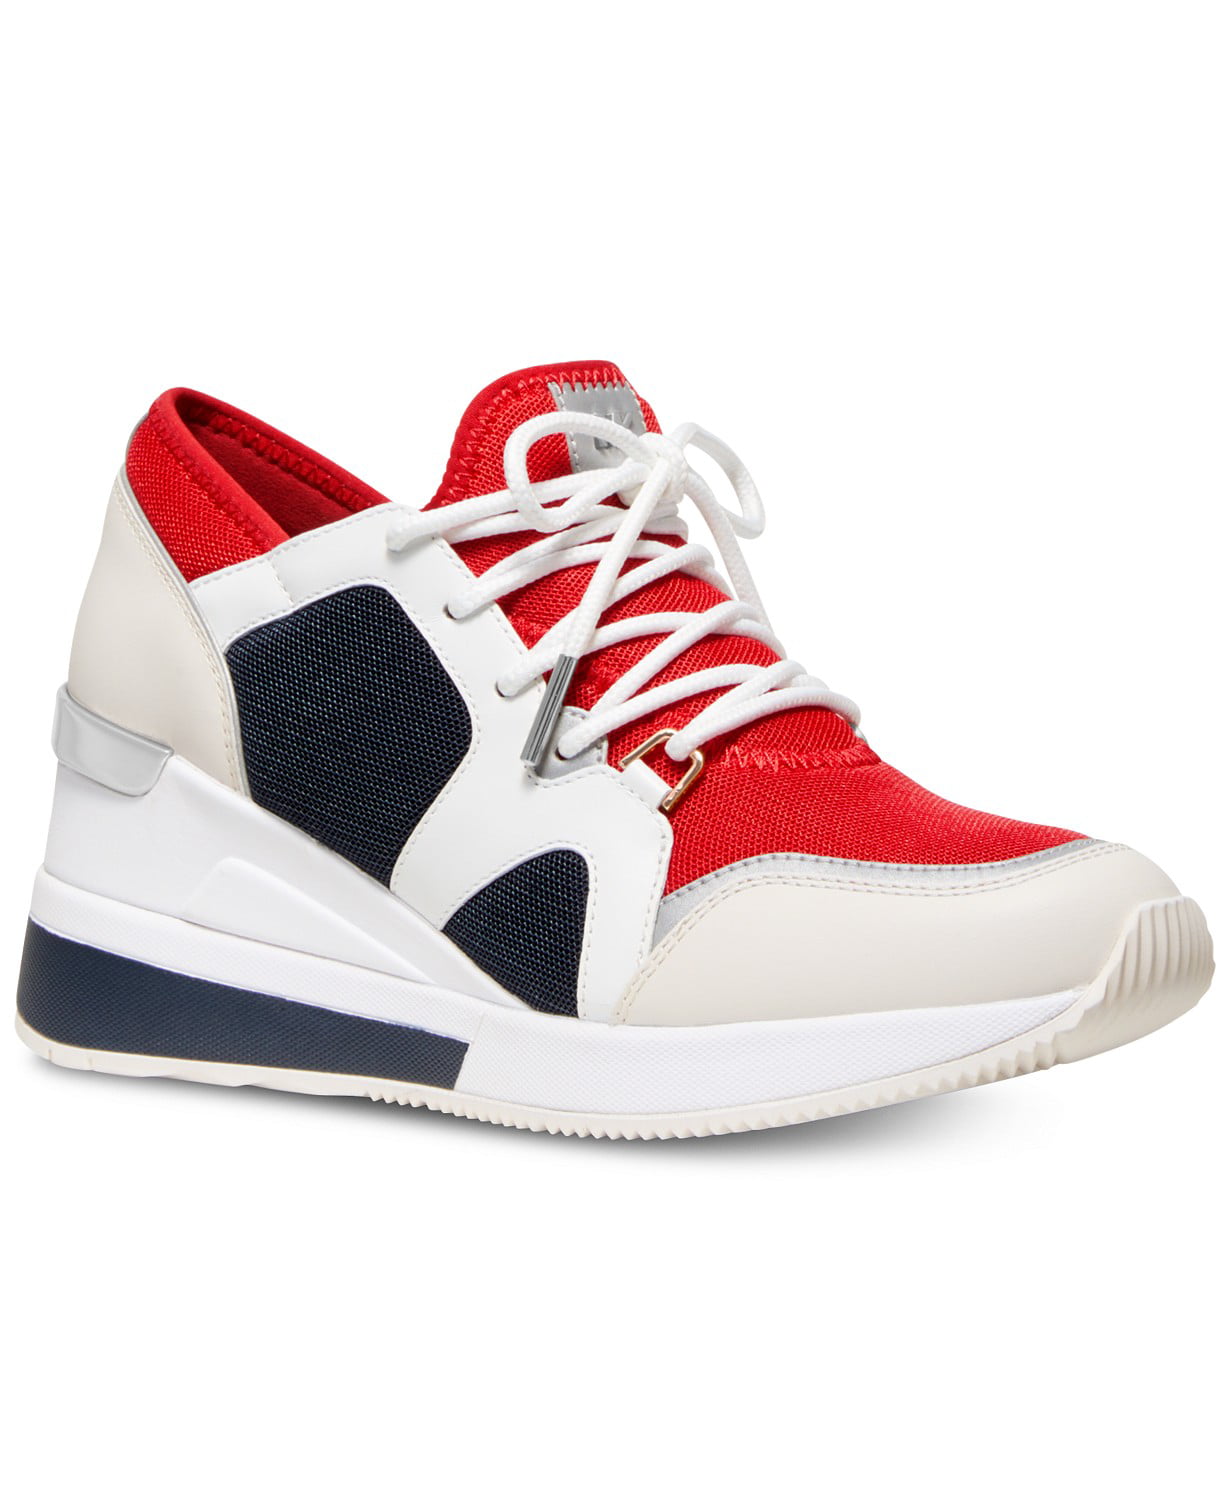 Michael Kors White And Red Sneakers Flash Sales, 51% OFF 